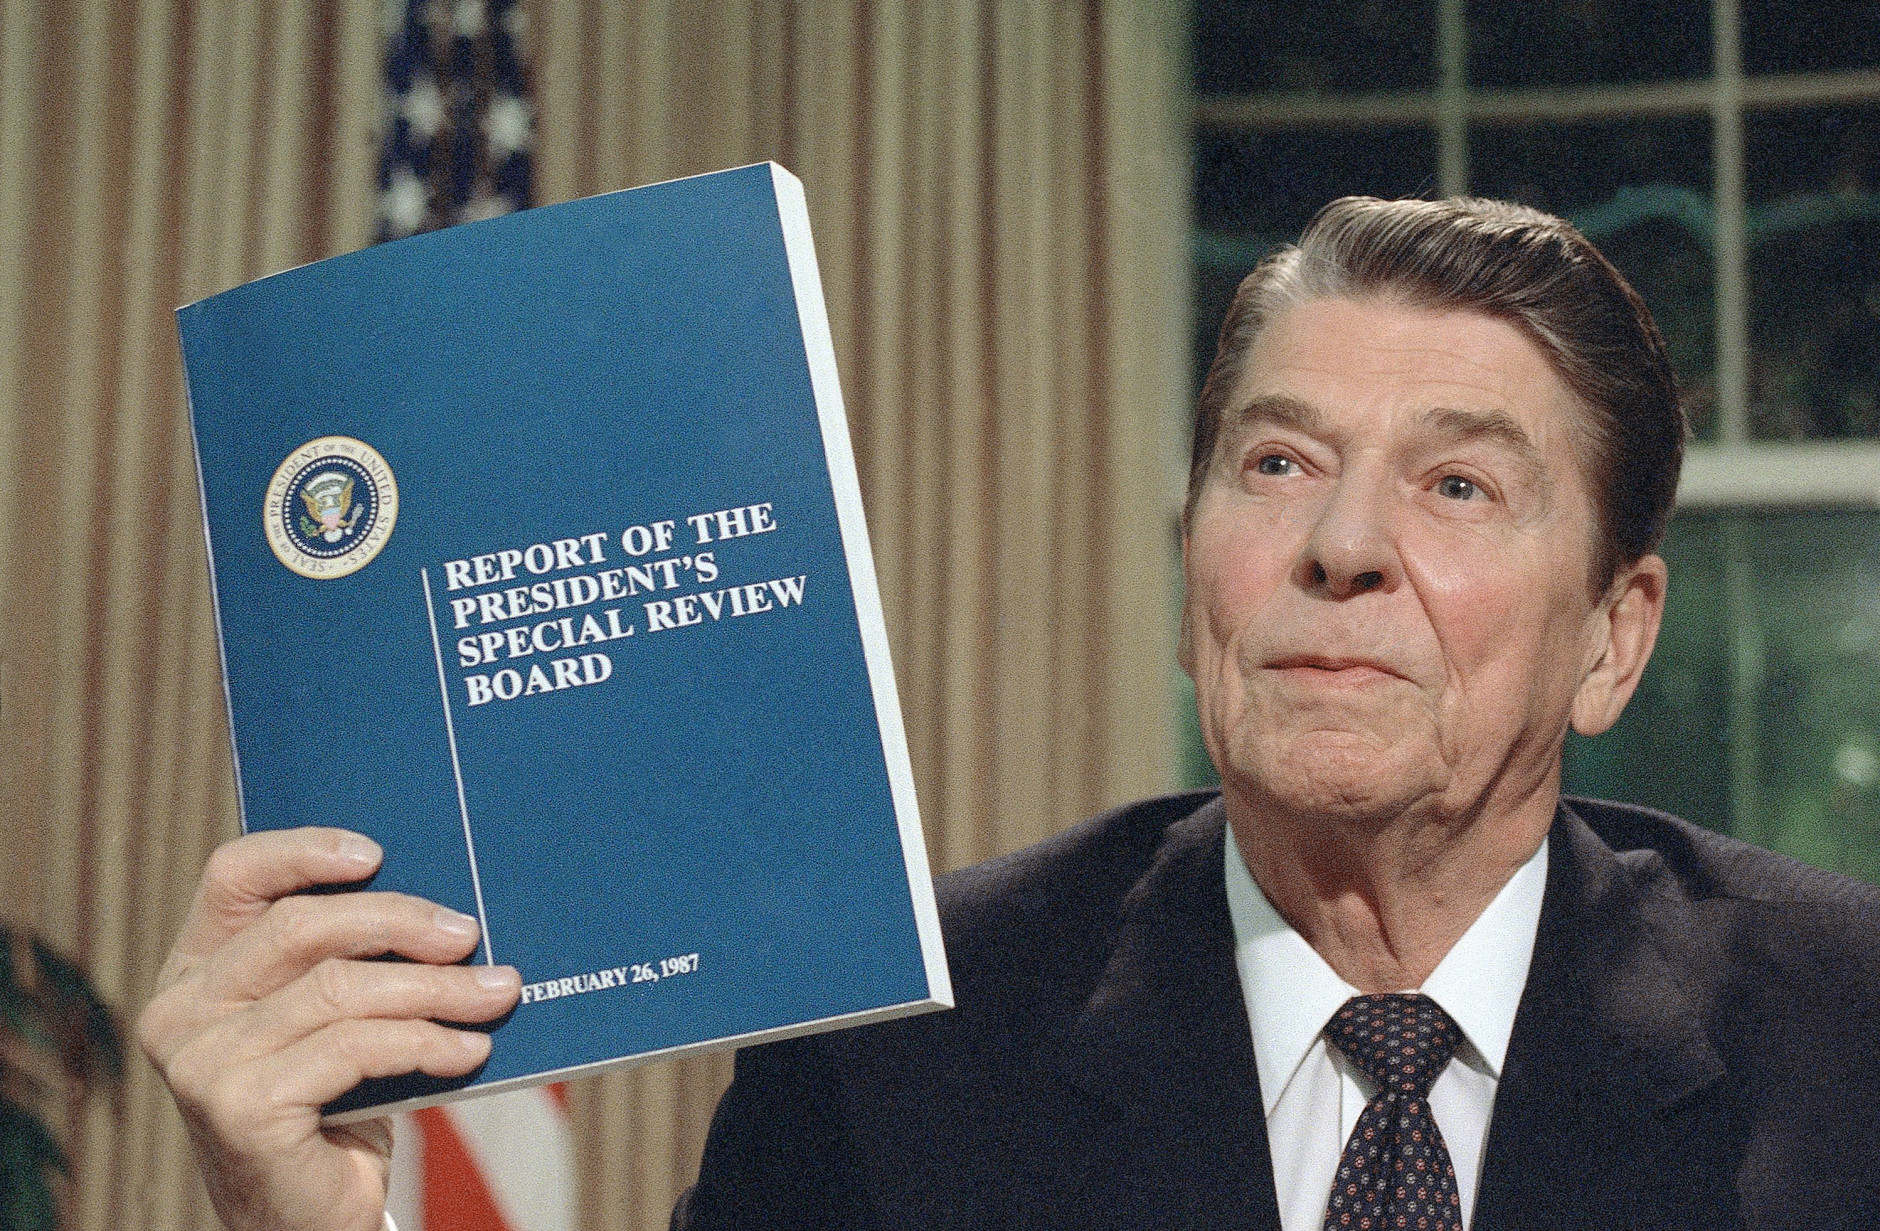 President Ronald Reagan holds up a copy of the Tower Commission report on the Iran-Contra affair, while posing for photographers after his nationally televised speech from the Oval Office in Washington, Aug. 13, 1987. Reagan said he was mad as a hornet about damage to his administration from the Iran-Contra affair. (AP Photo/Ron Edmonds)